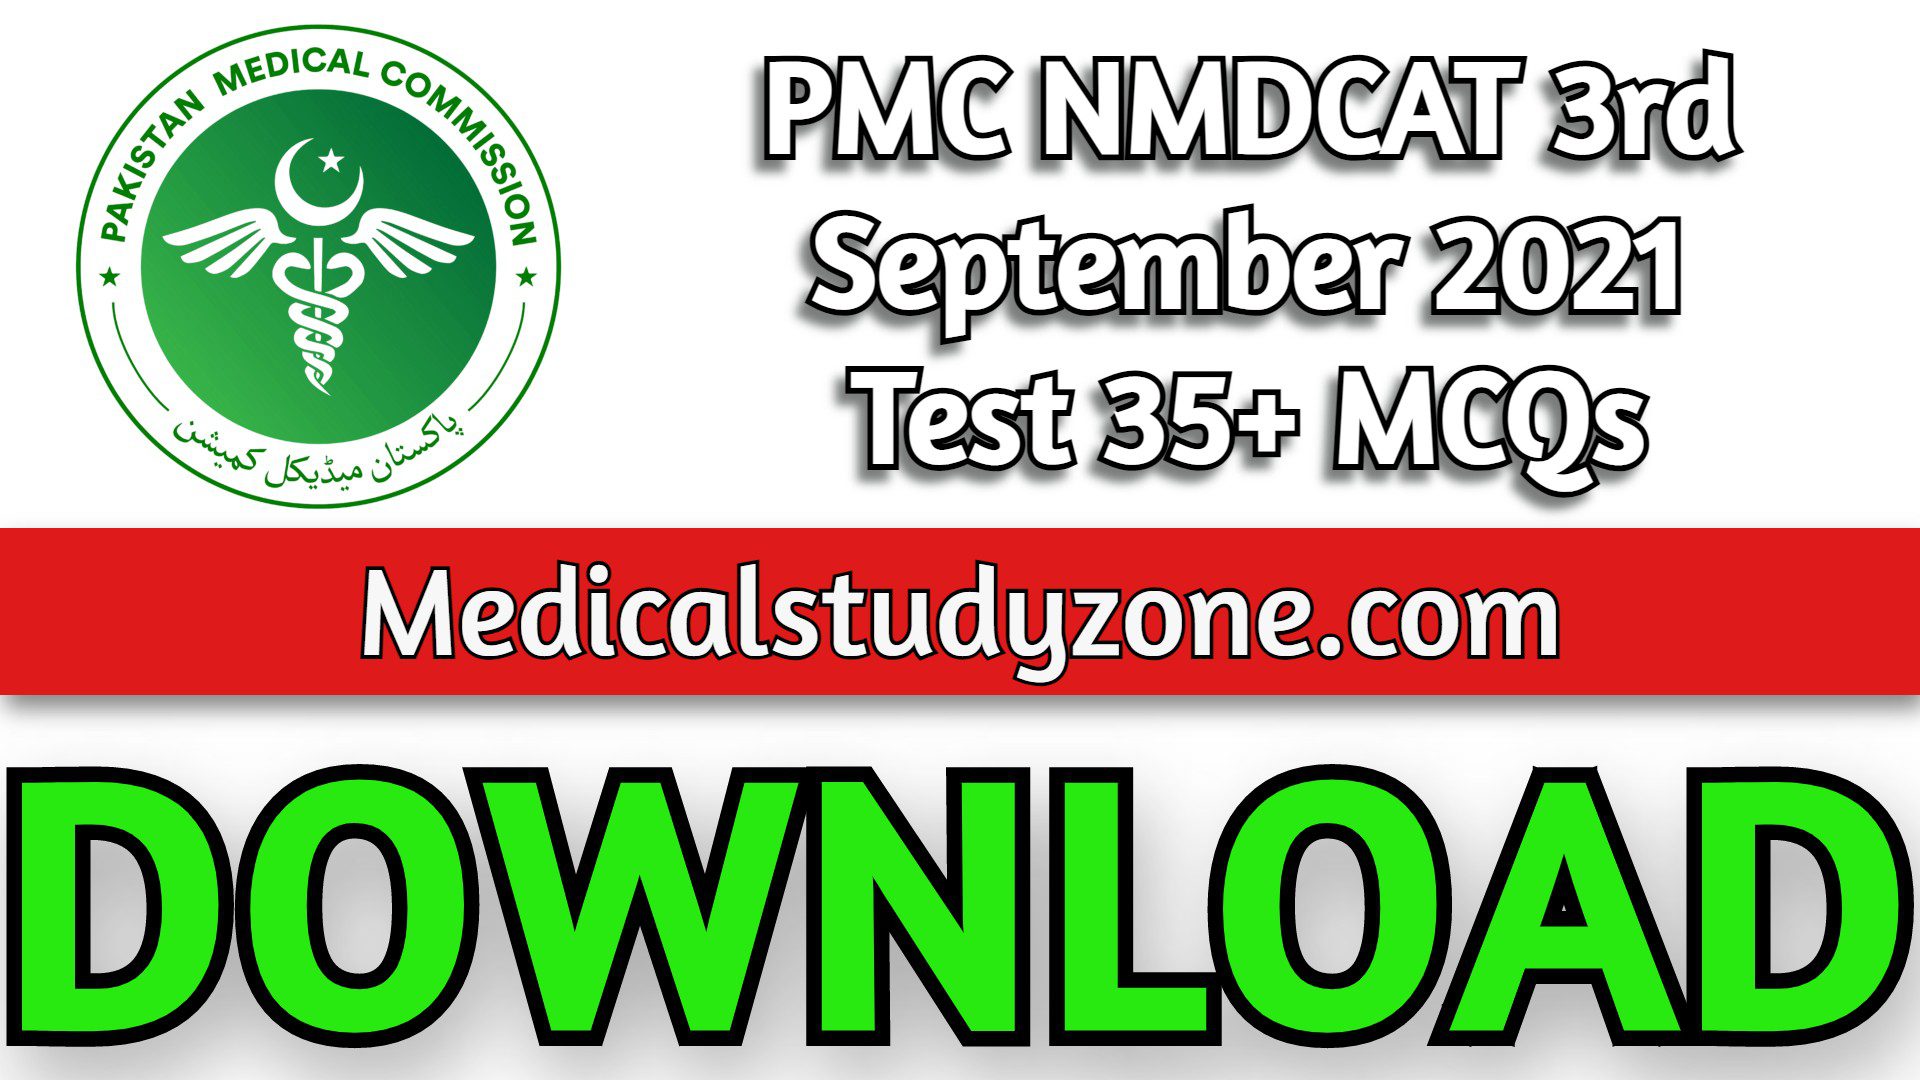 PMC NMDCAT 3rd September 2021 Test 35+ MCQs Collection PDF Free Download